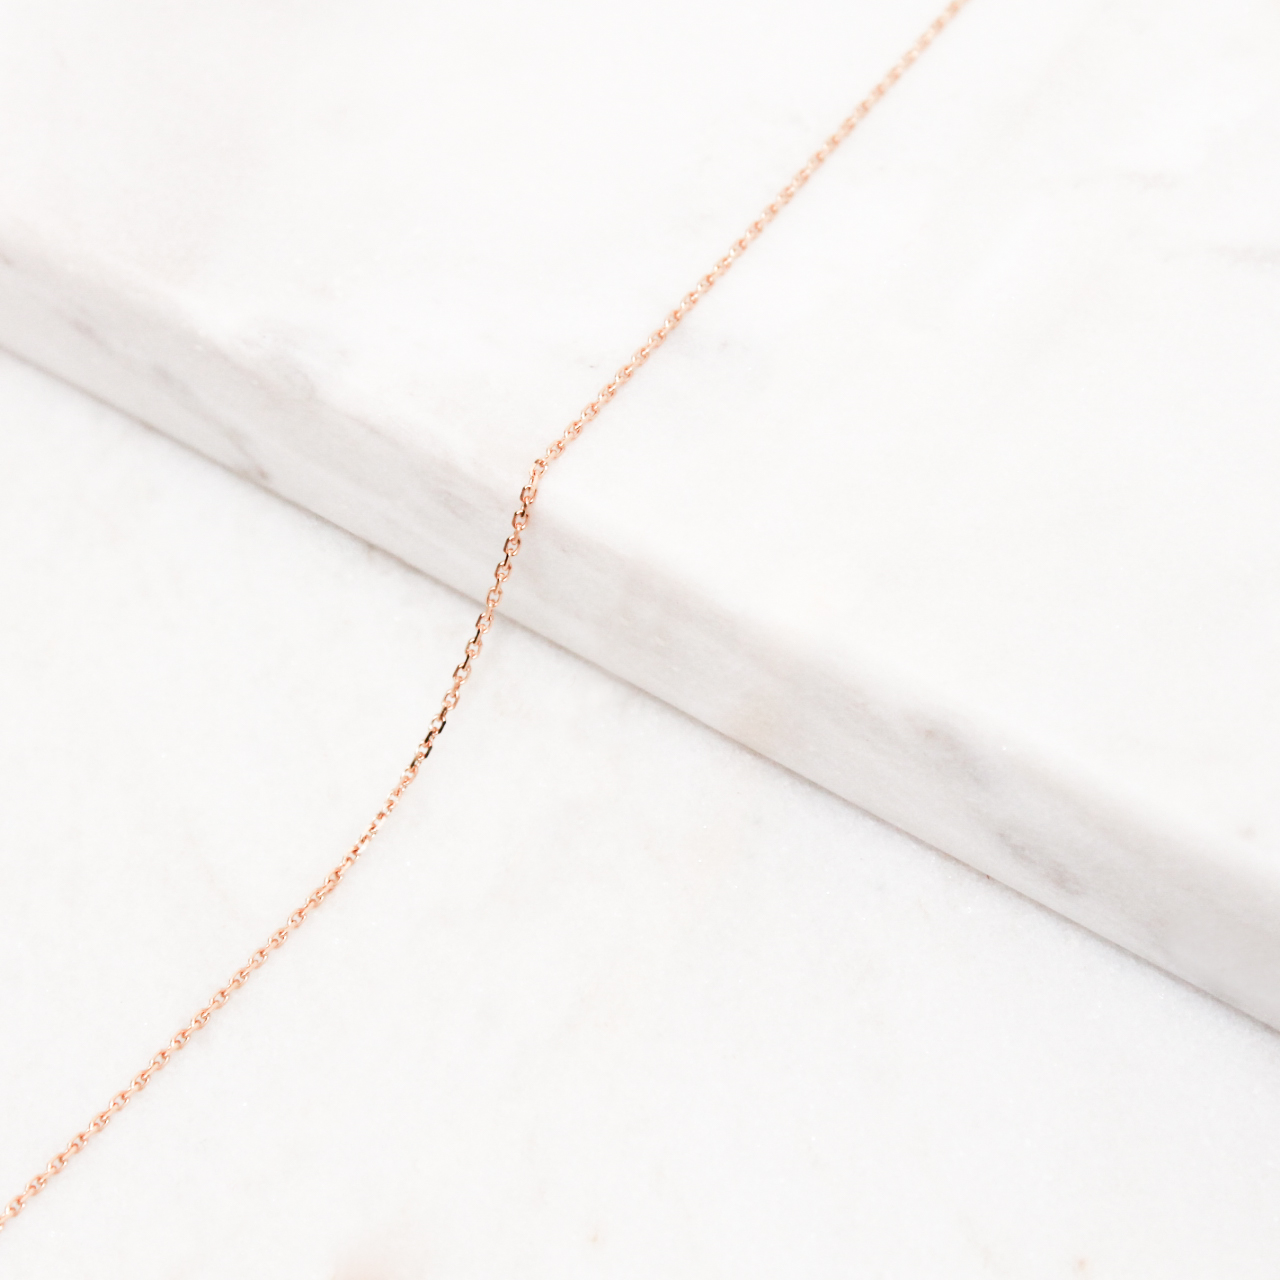 Filed Cable Chain rose gold 18 carats